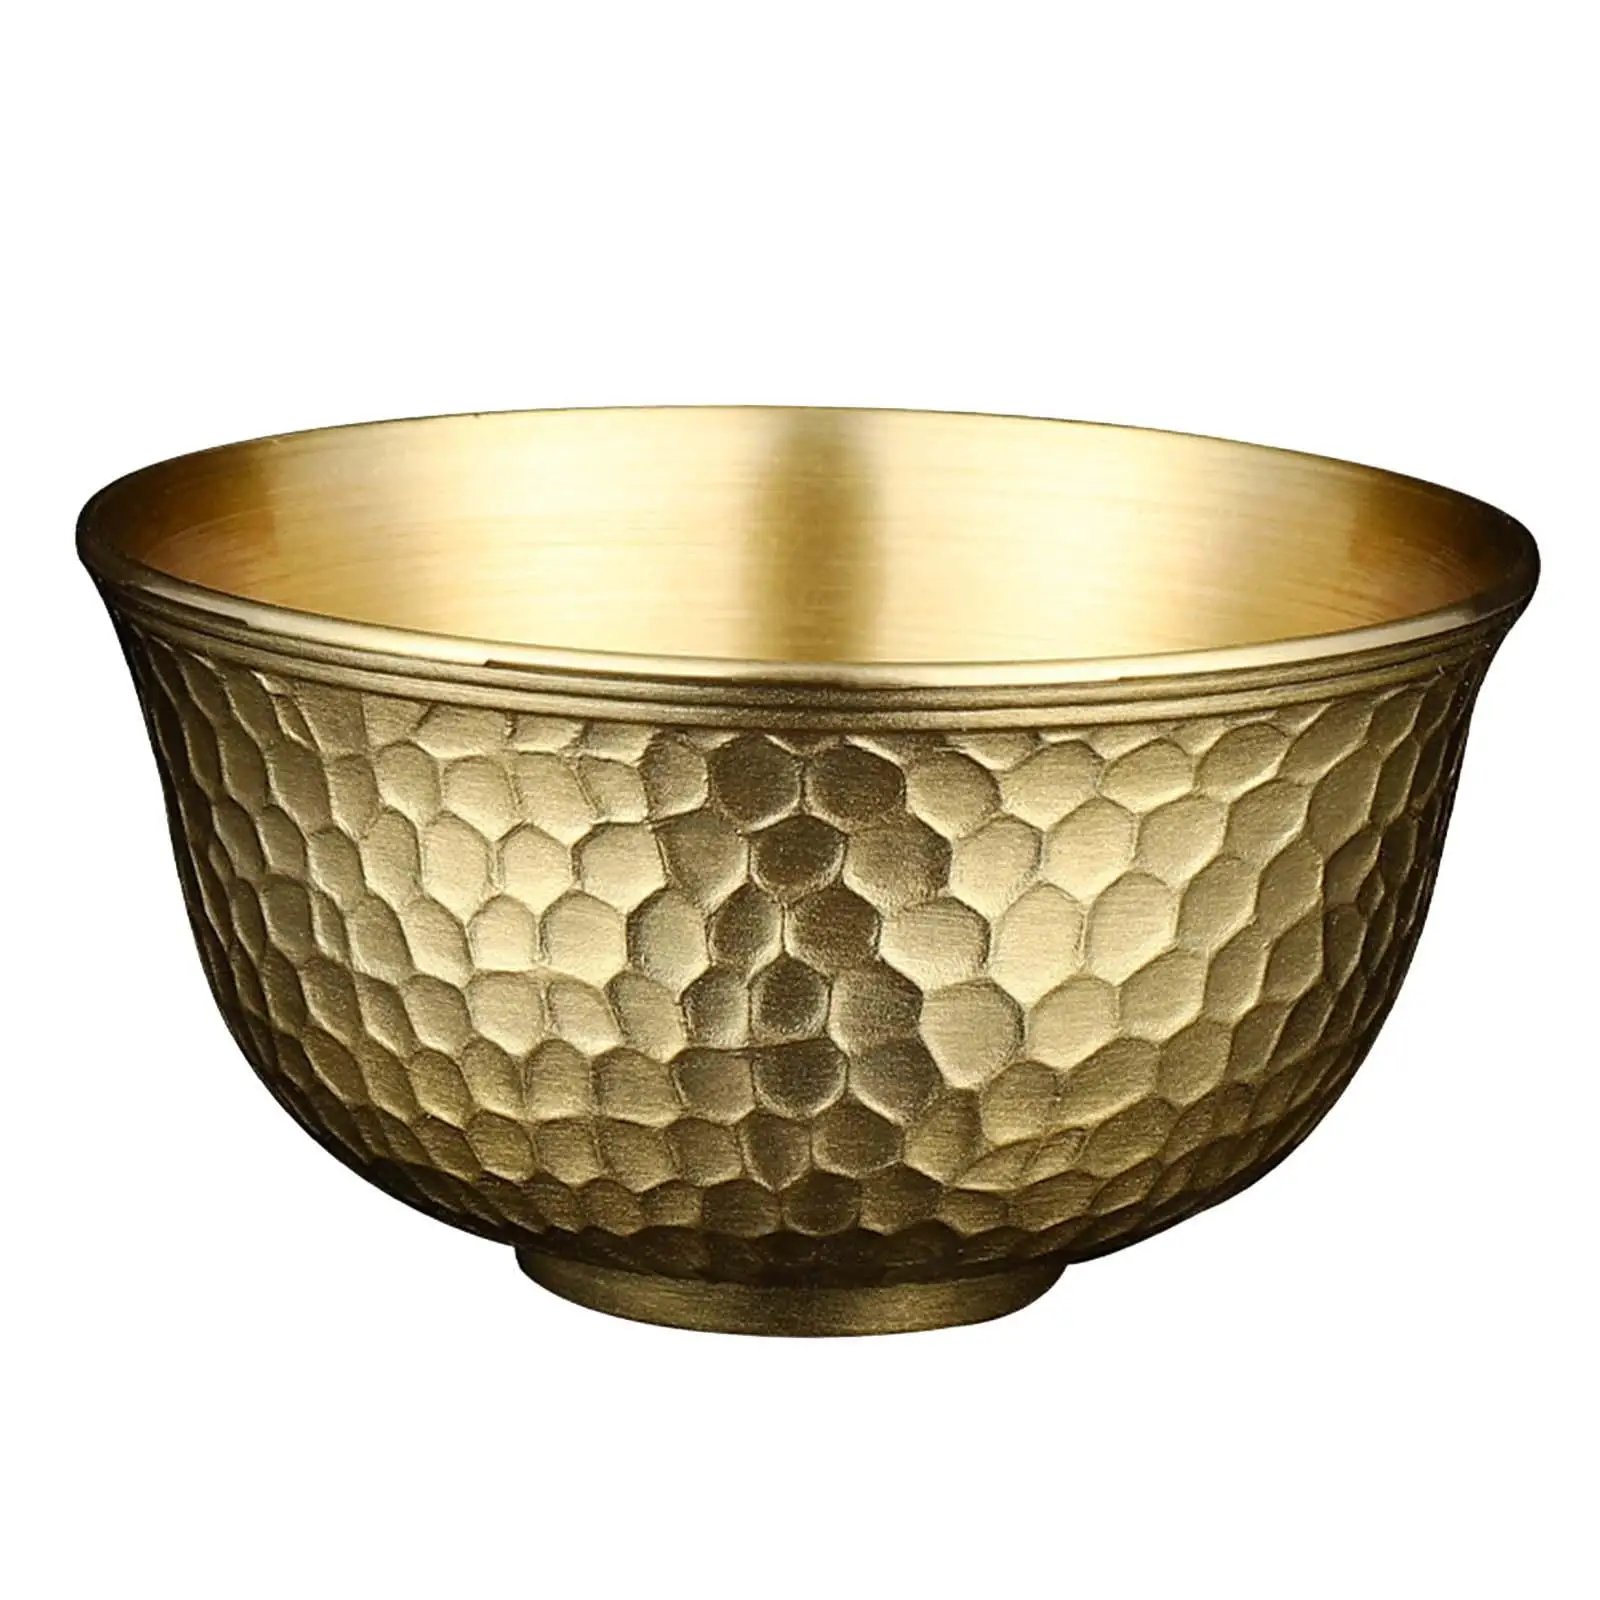 Treasure Bowl Novelty Classic Heavy Duty 2.48`` Diameter Copper Serving Bowl for Salads Mashed Potatoes Snacks Clam Fresh Fruit